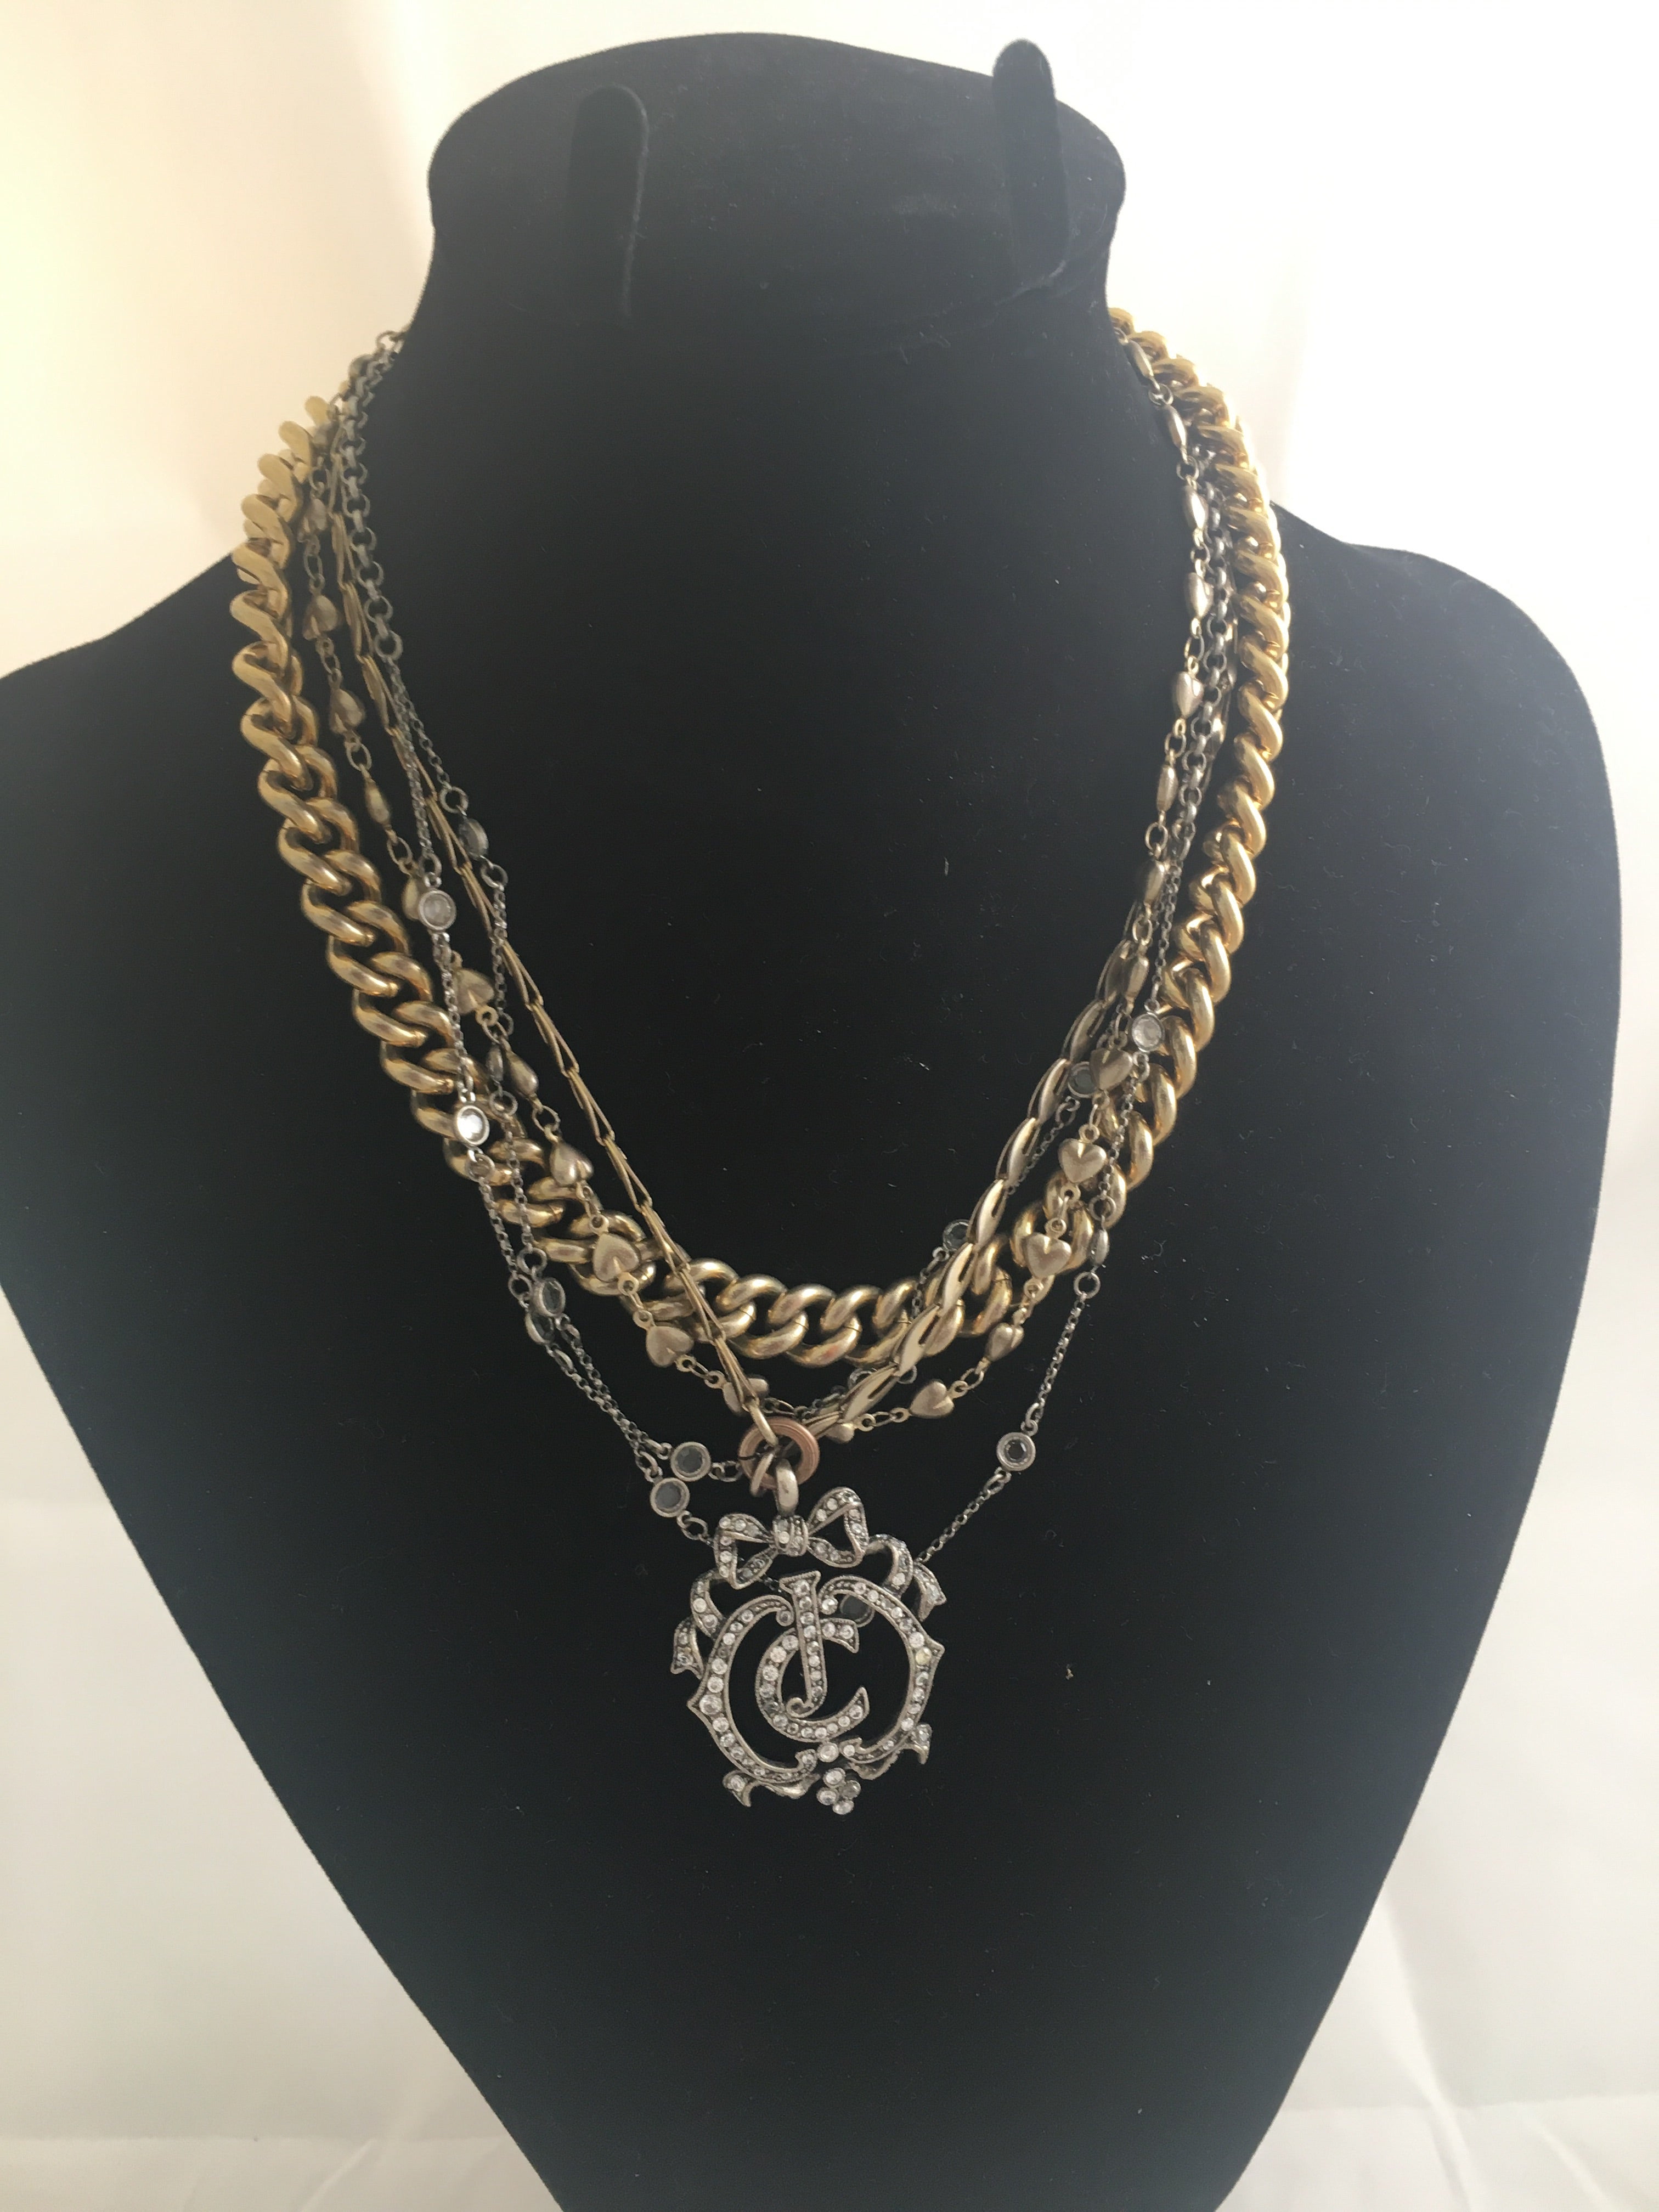 Juicy Couture, Jewelry, Juicy Couture Necklace And Earrings